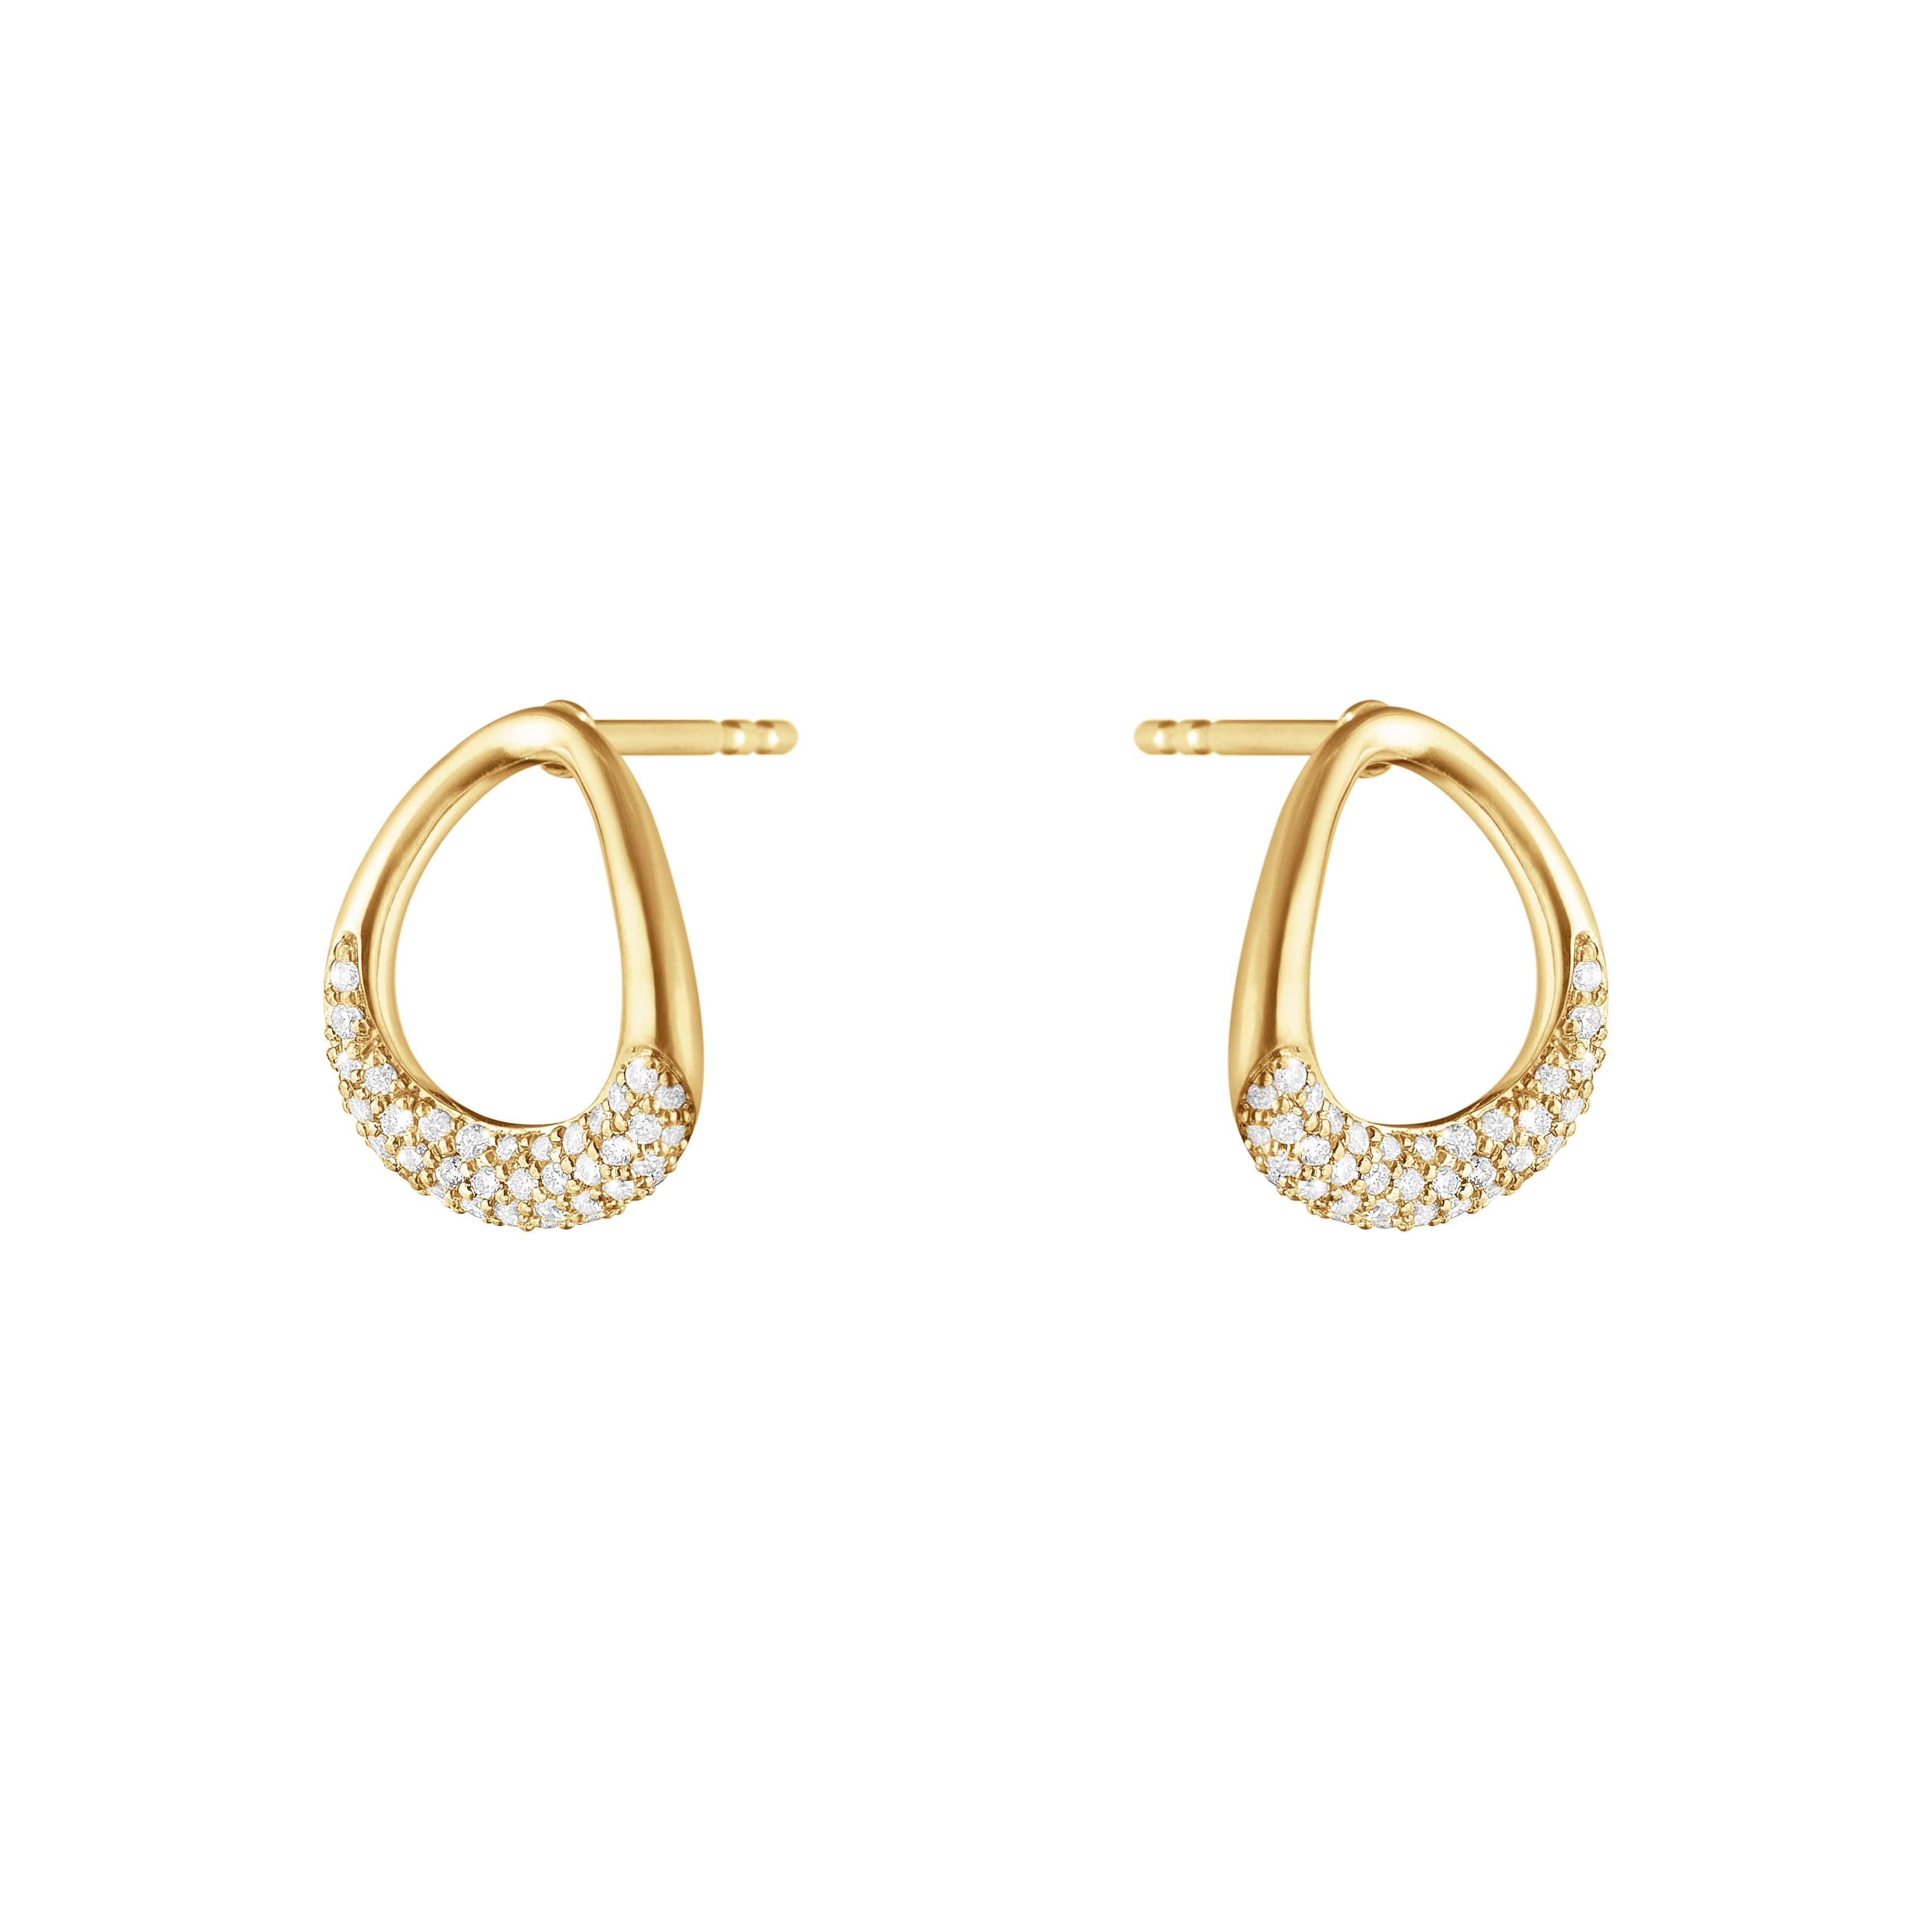 Offspring Earstud 1433D Yellow Gold Diamond Pave 0.19 In New Condition For Sale In New York, NY